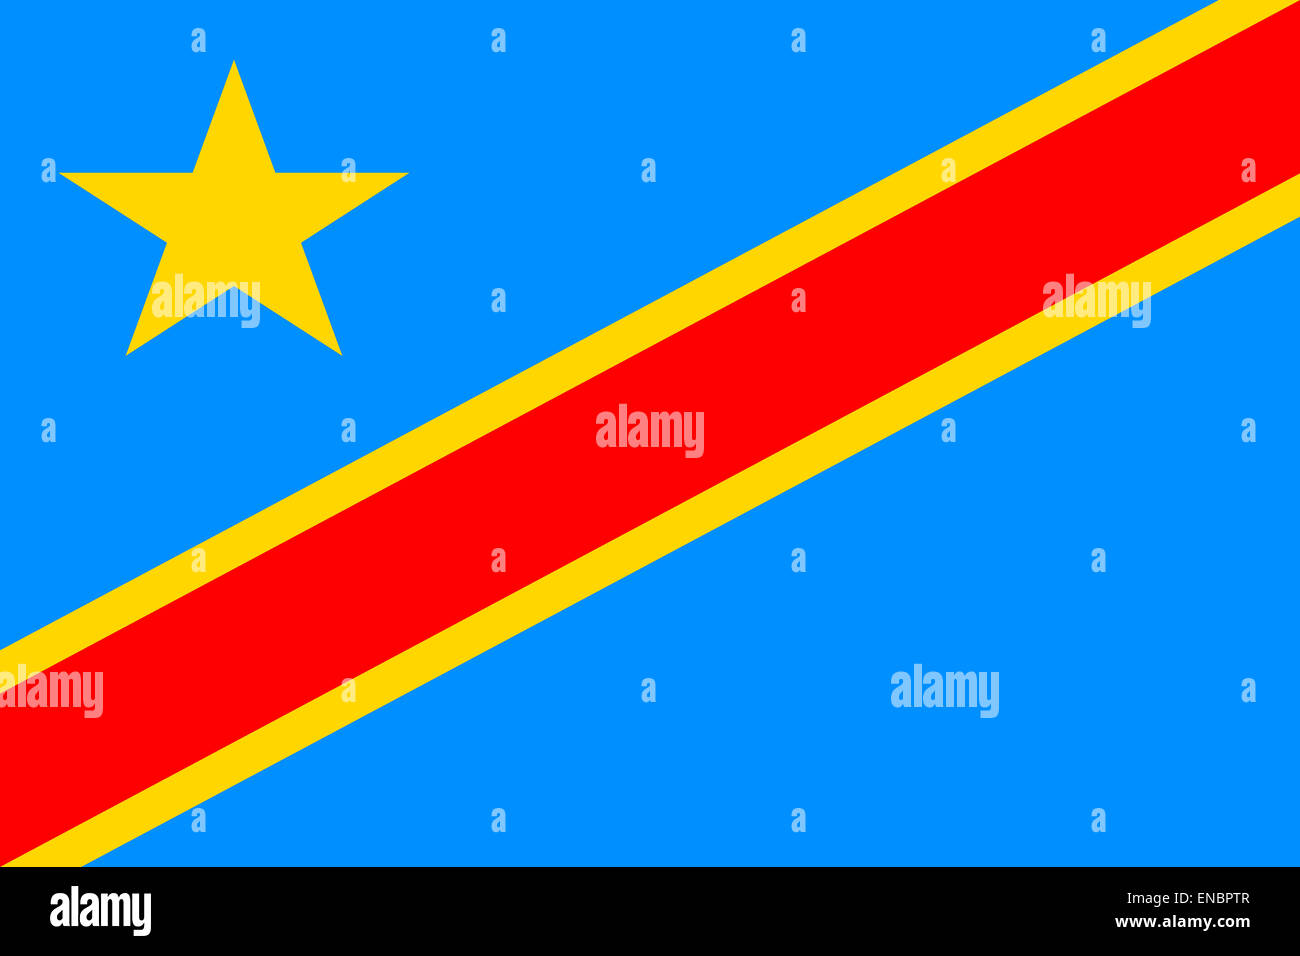 National flag of the Democratic Republic of the Congo. Stock Photo